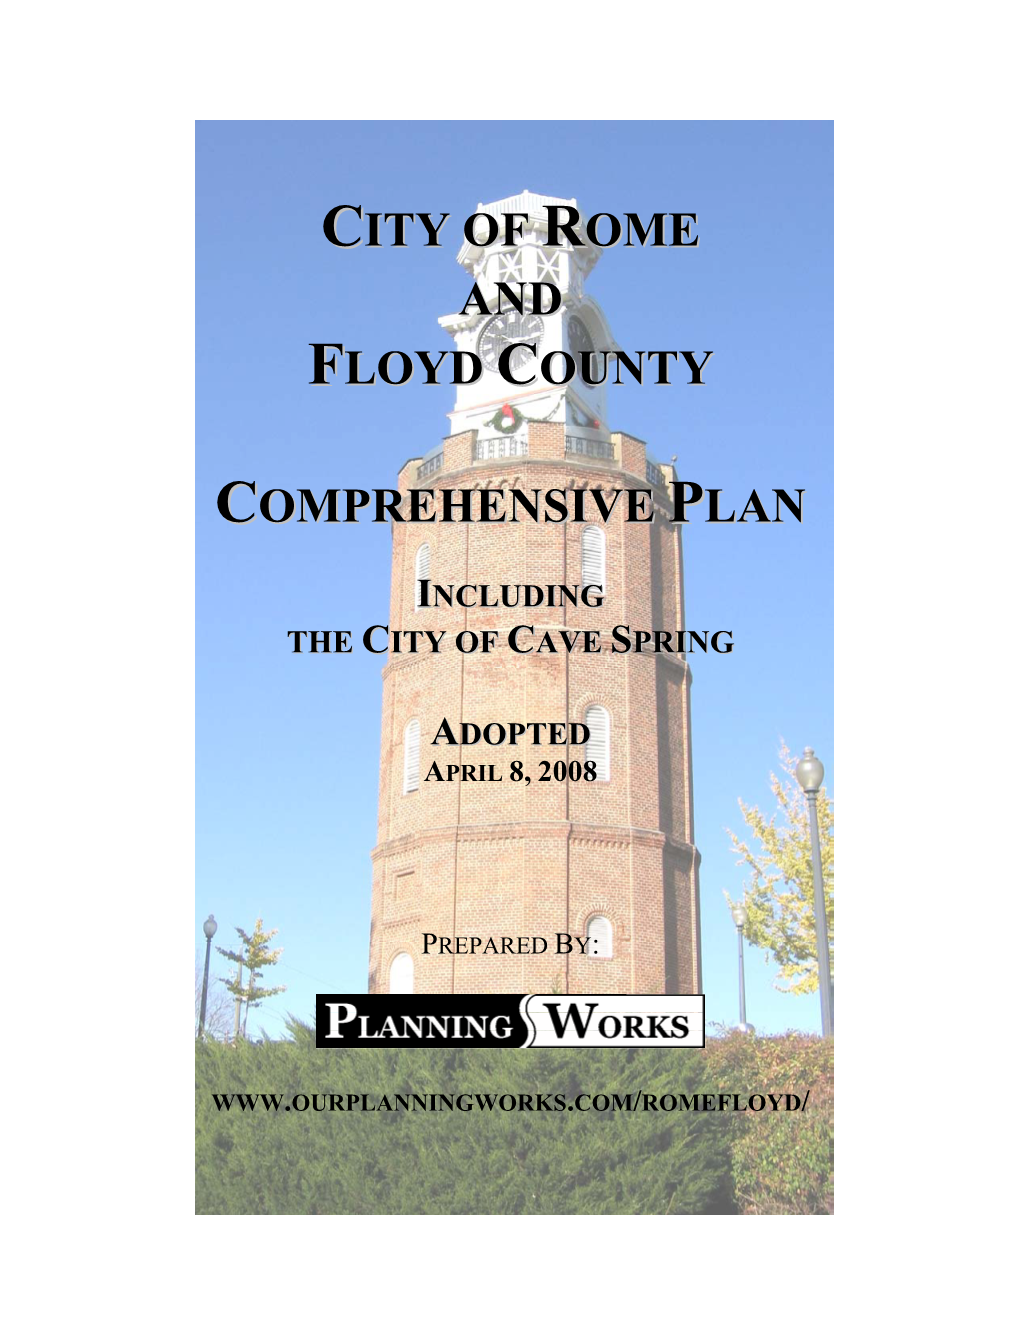 City of Rome and Floyd County Comprehensive Plan